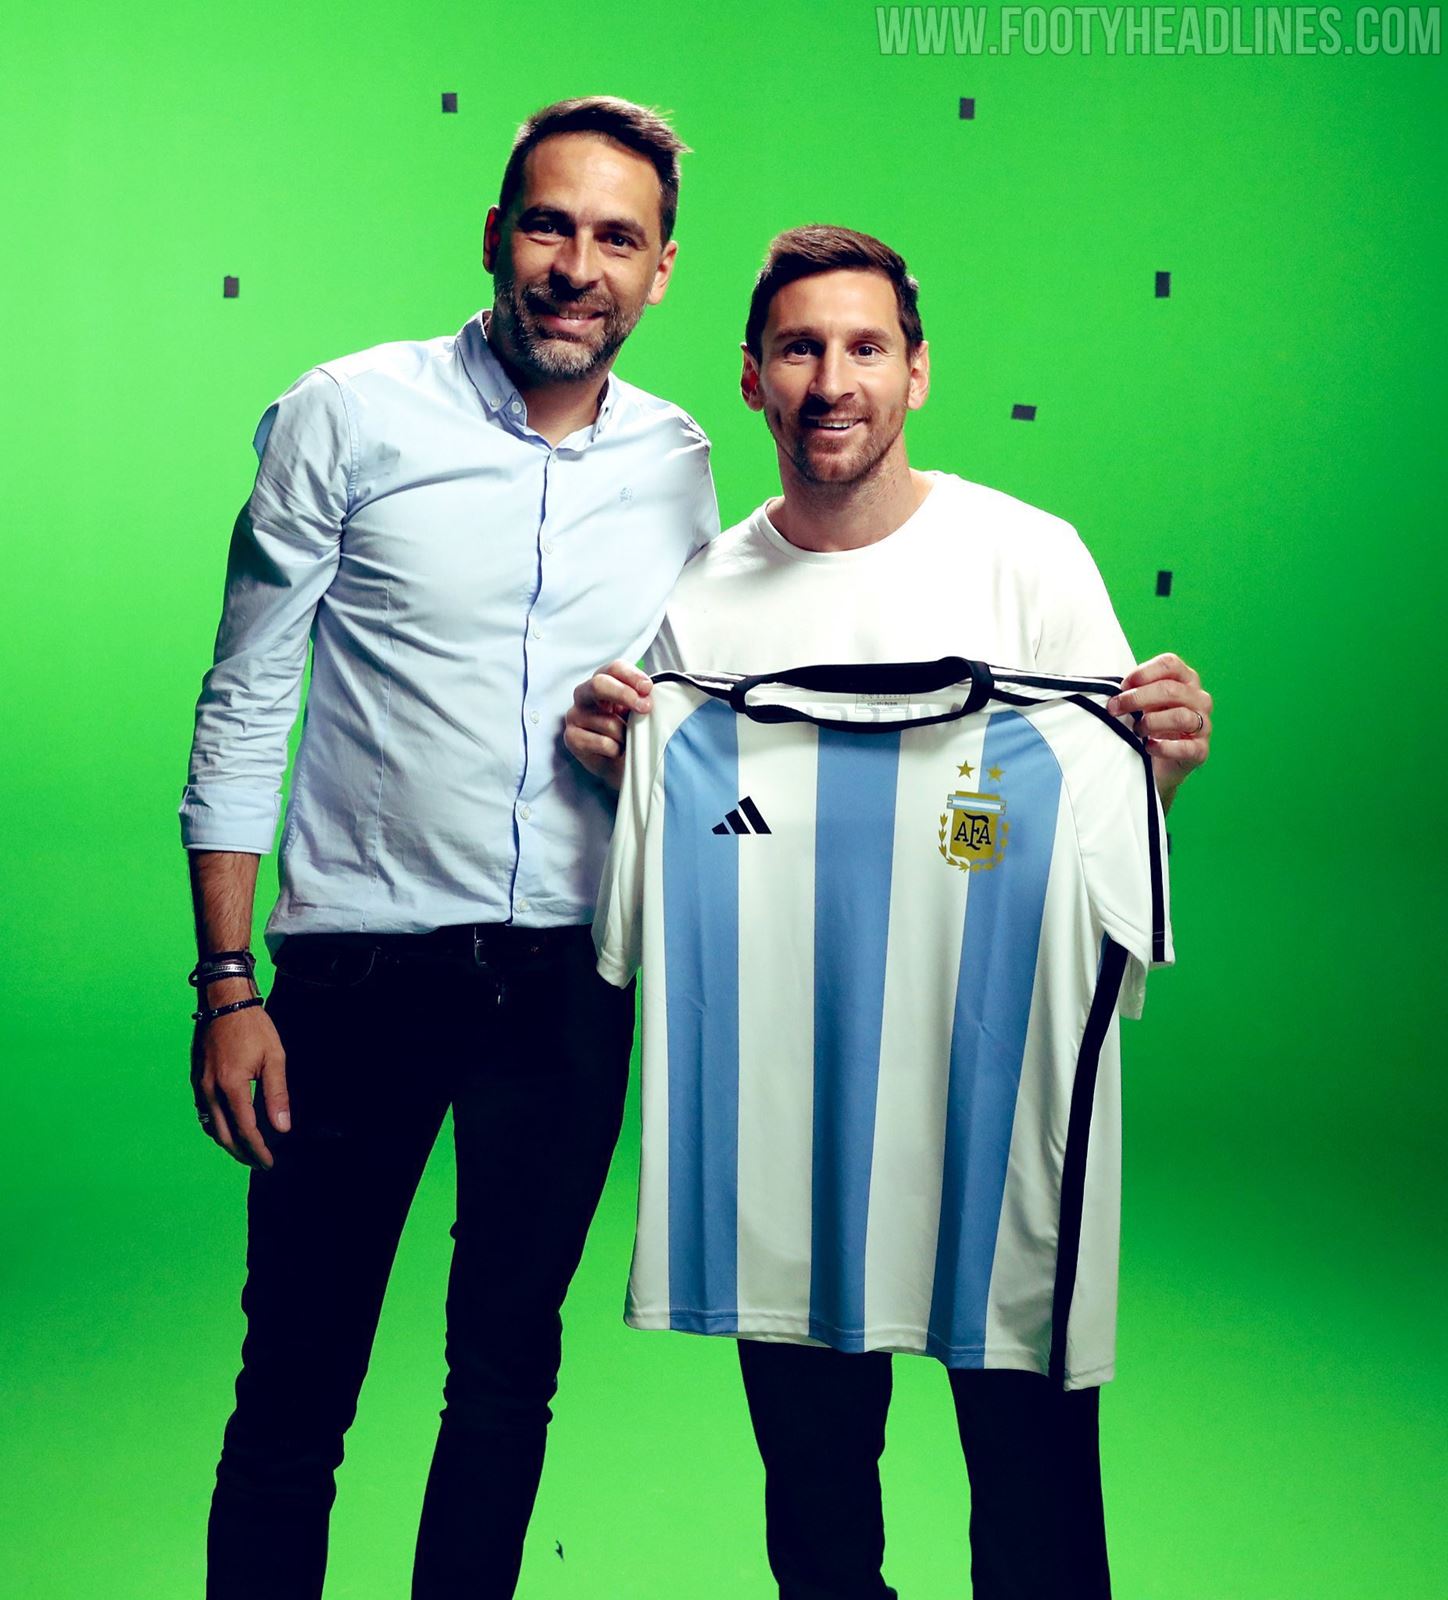 Argentina 2022 jersey: Adidas' Argentina 2022 FIFA World Cup kit: Where to  buy, release date, price, and more explored